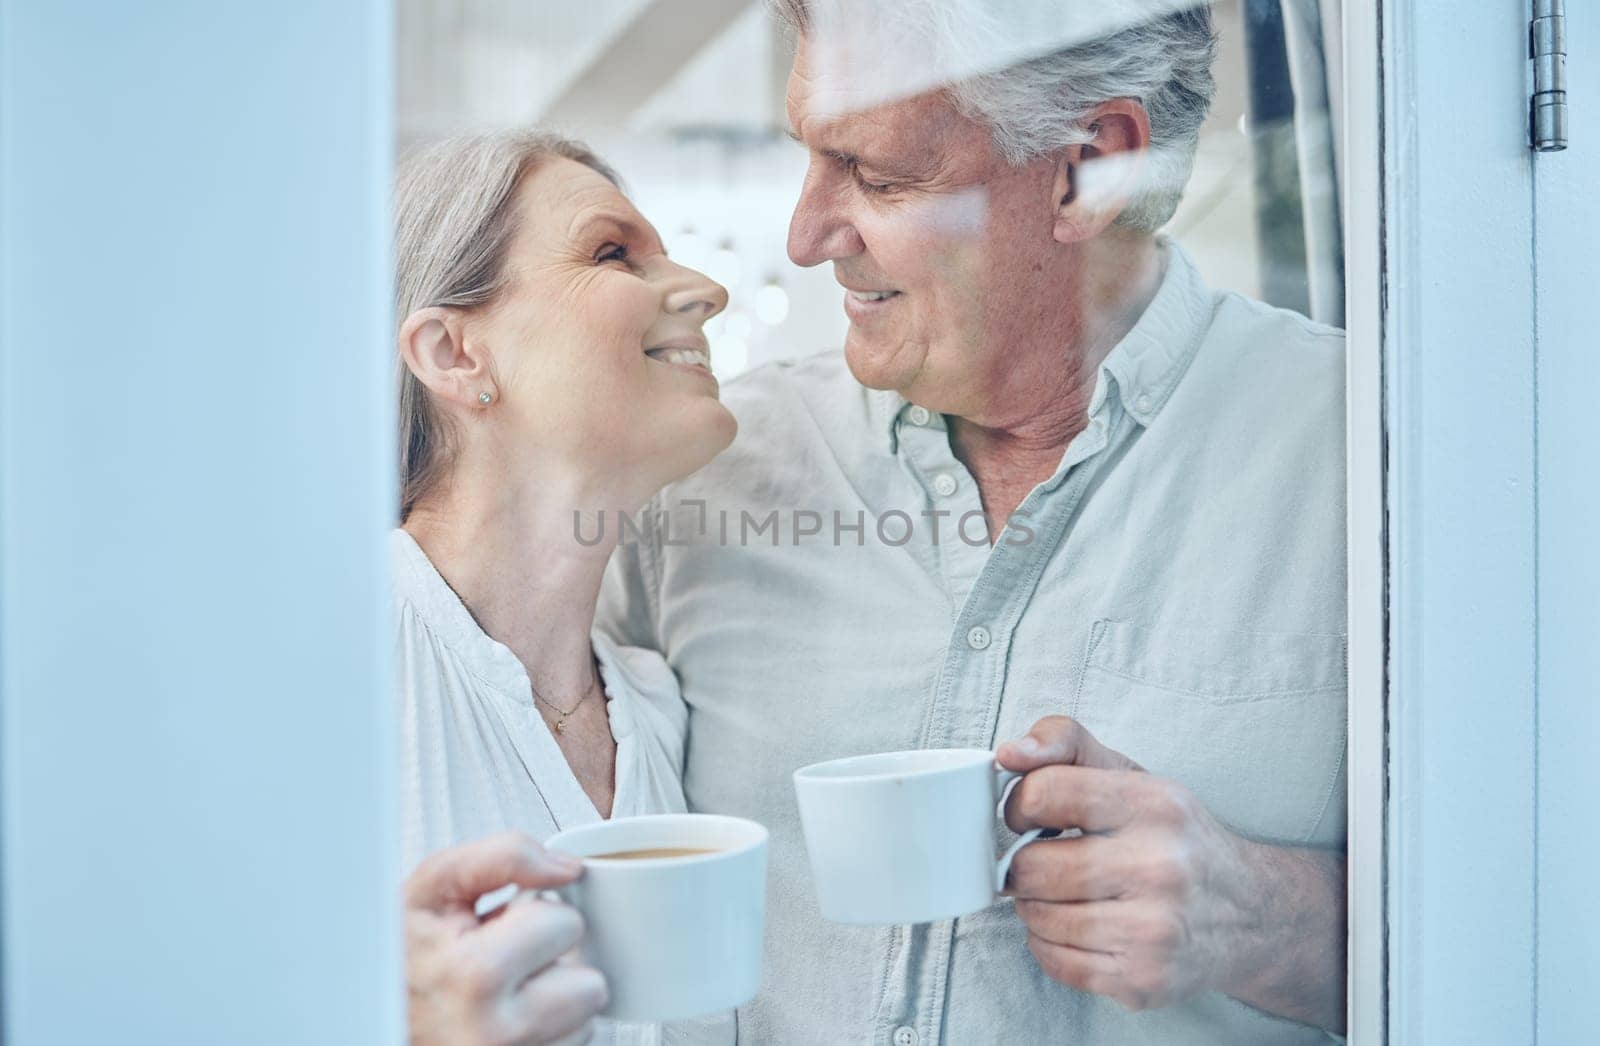 Retirement, coffee and love with a senior couple drinking or enjoying a beverage together in their home. Relax, romance and bonding with an elderly man and woman pensioner by a door in their house.